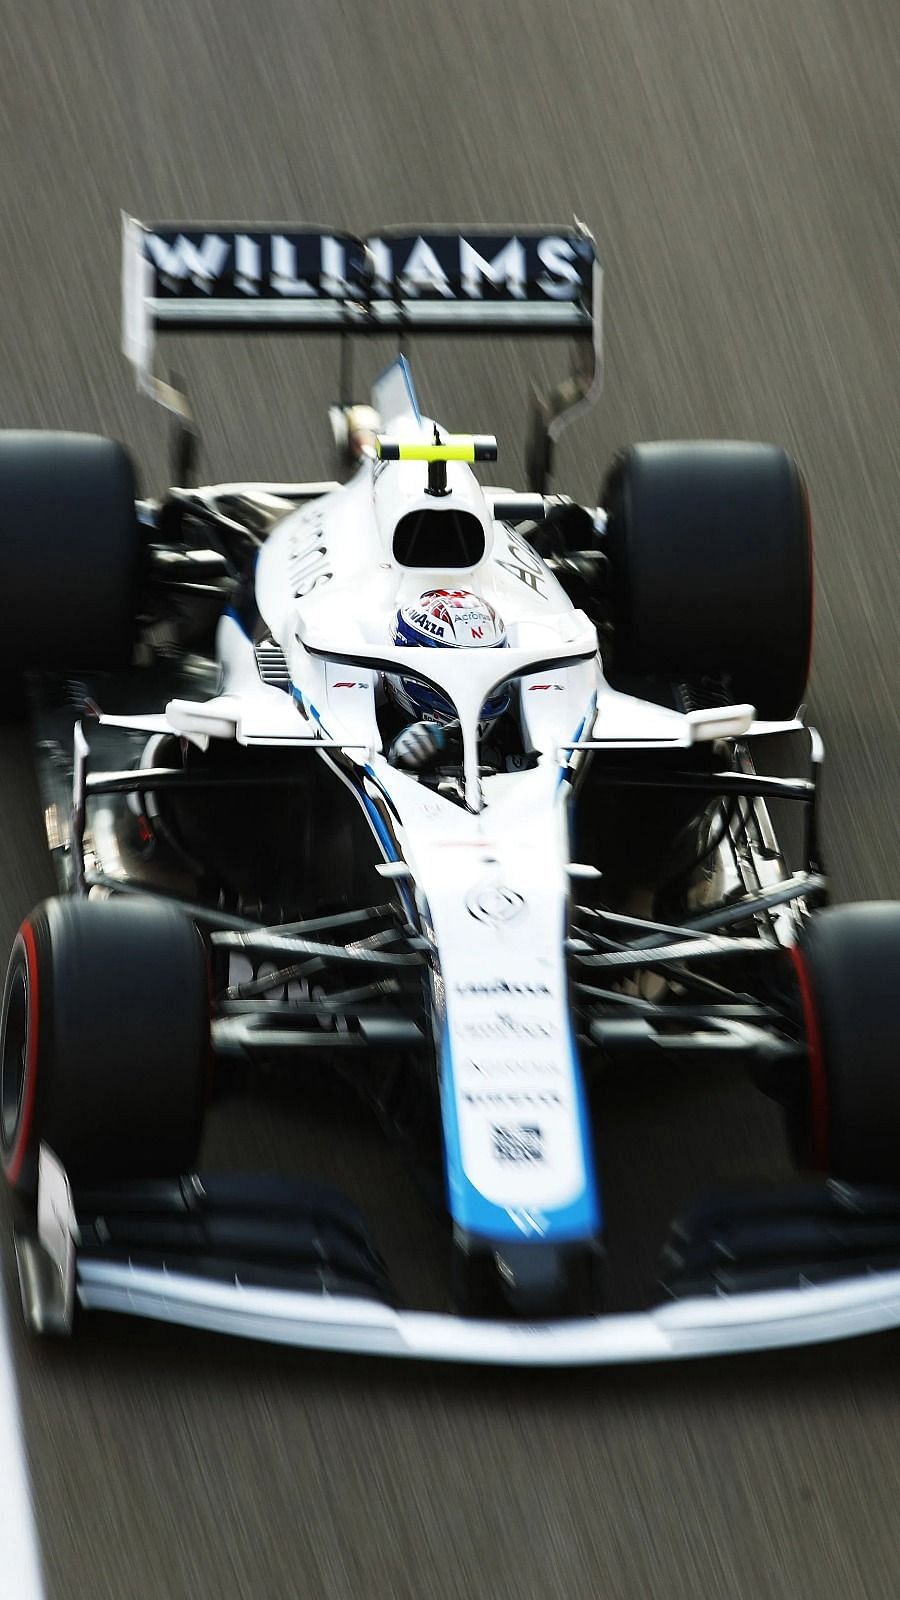 Williams' new Umbro kit unveiled by the F1 team's drivers